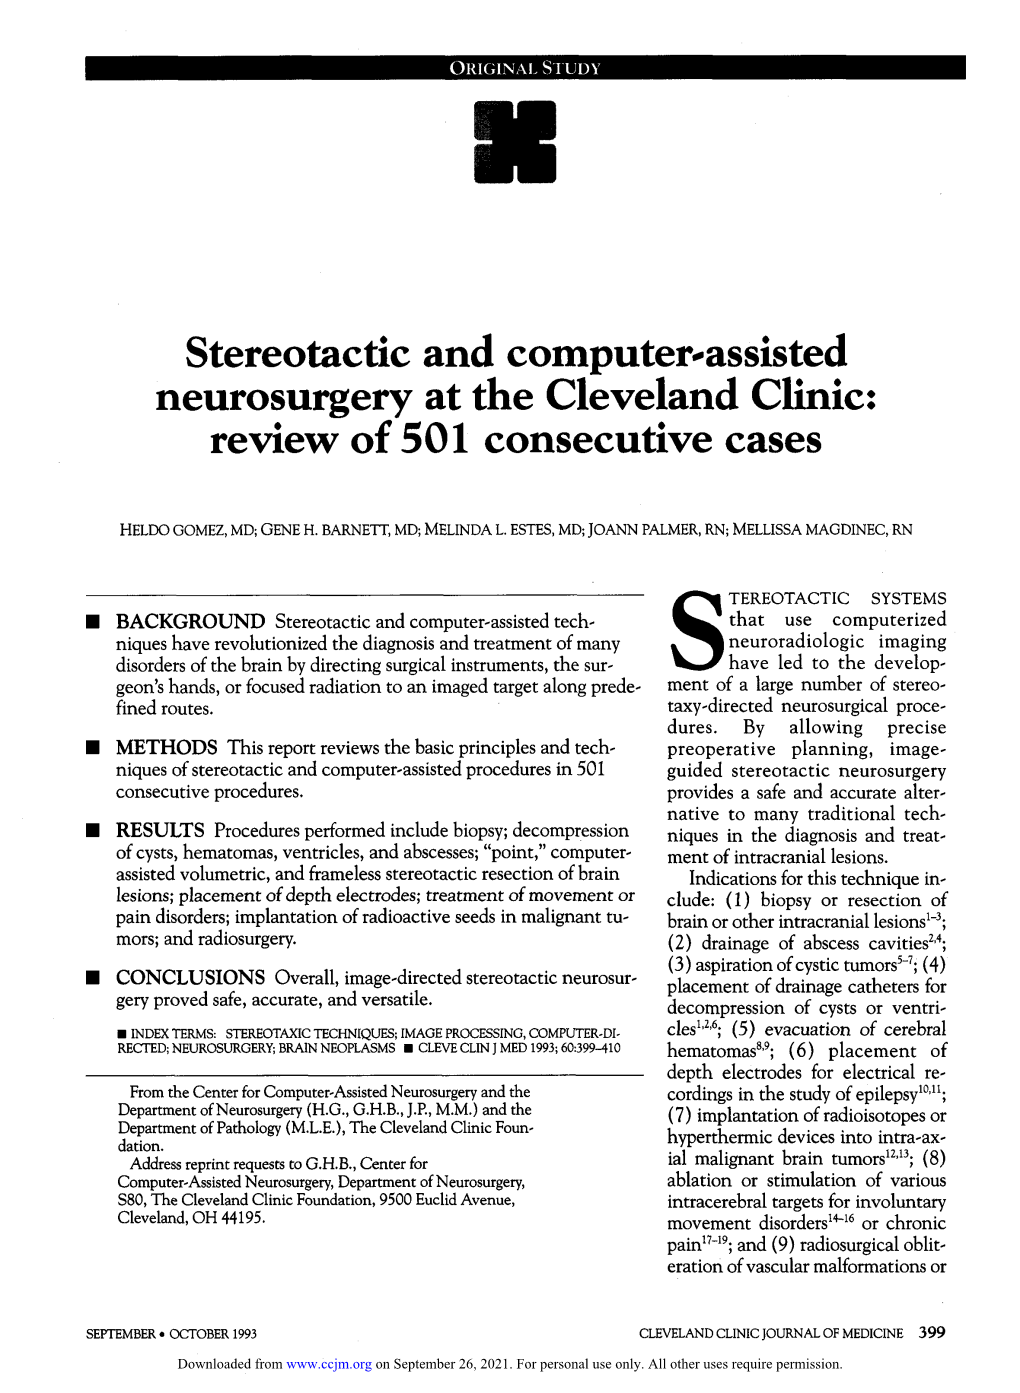 Stereotactic and Computer-Assisted Neurosurgery at the Cleveland Clinic